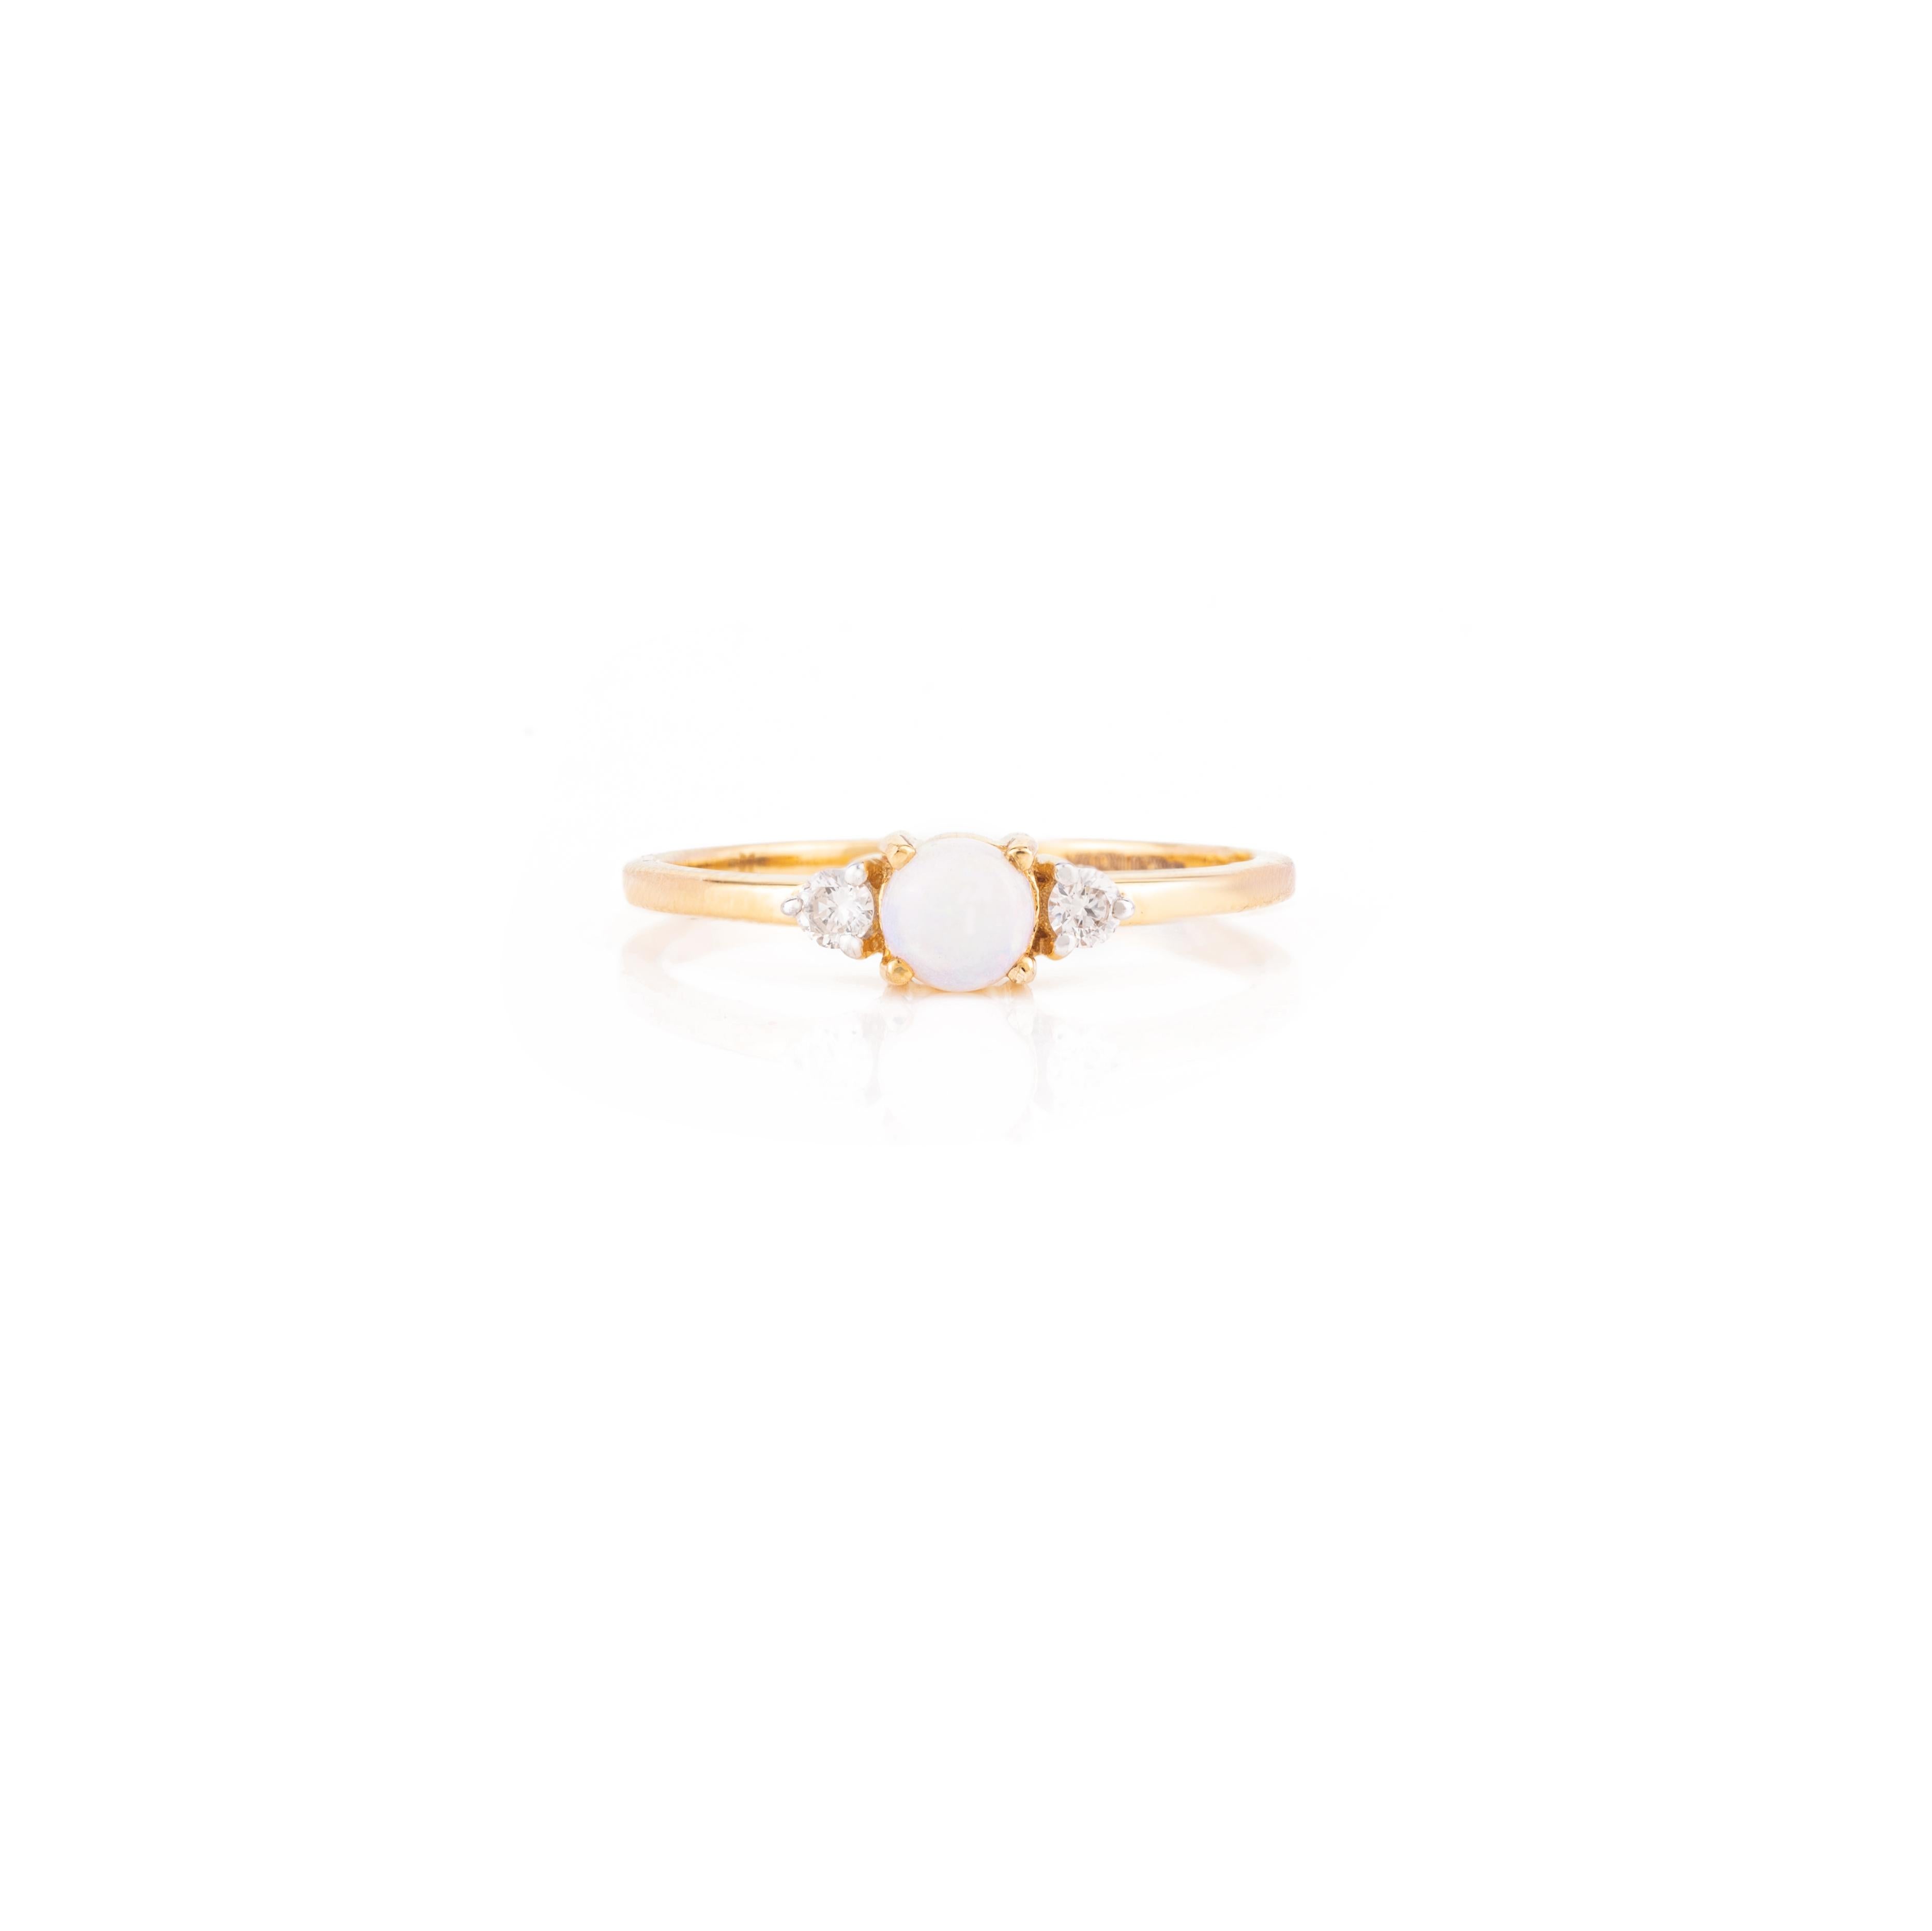 For Sale:  Minimal 18k Yellow Gold Opal Diamond Everyday Stackable Ring Gift 3